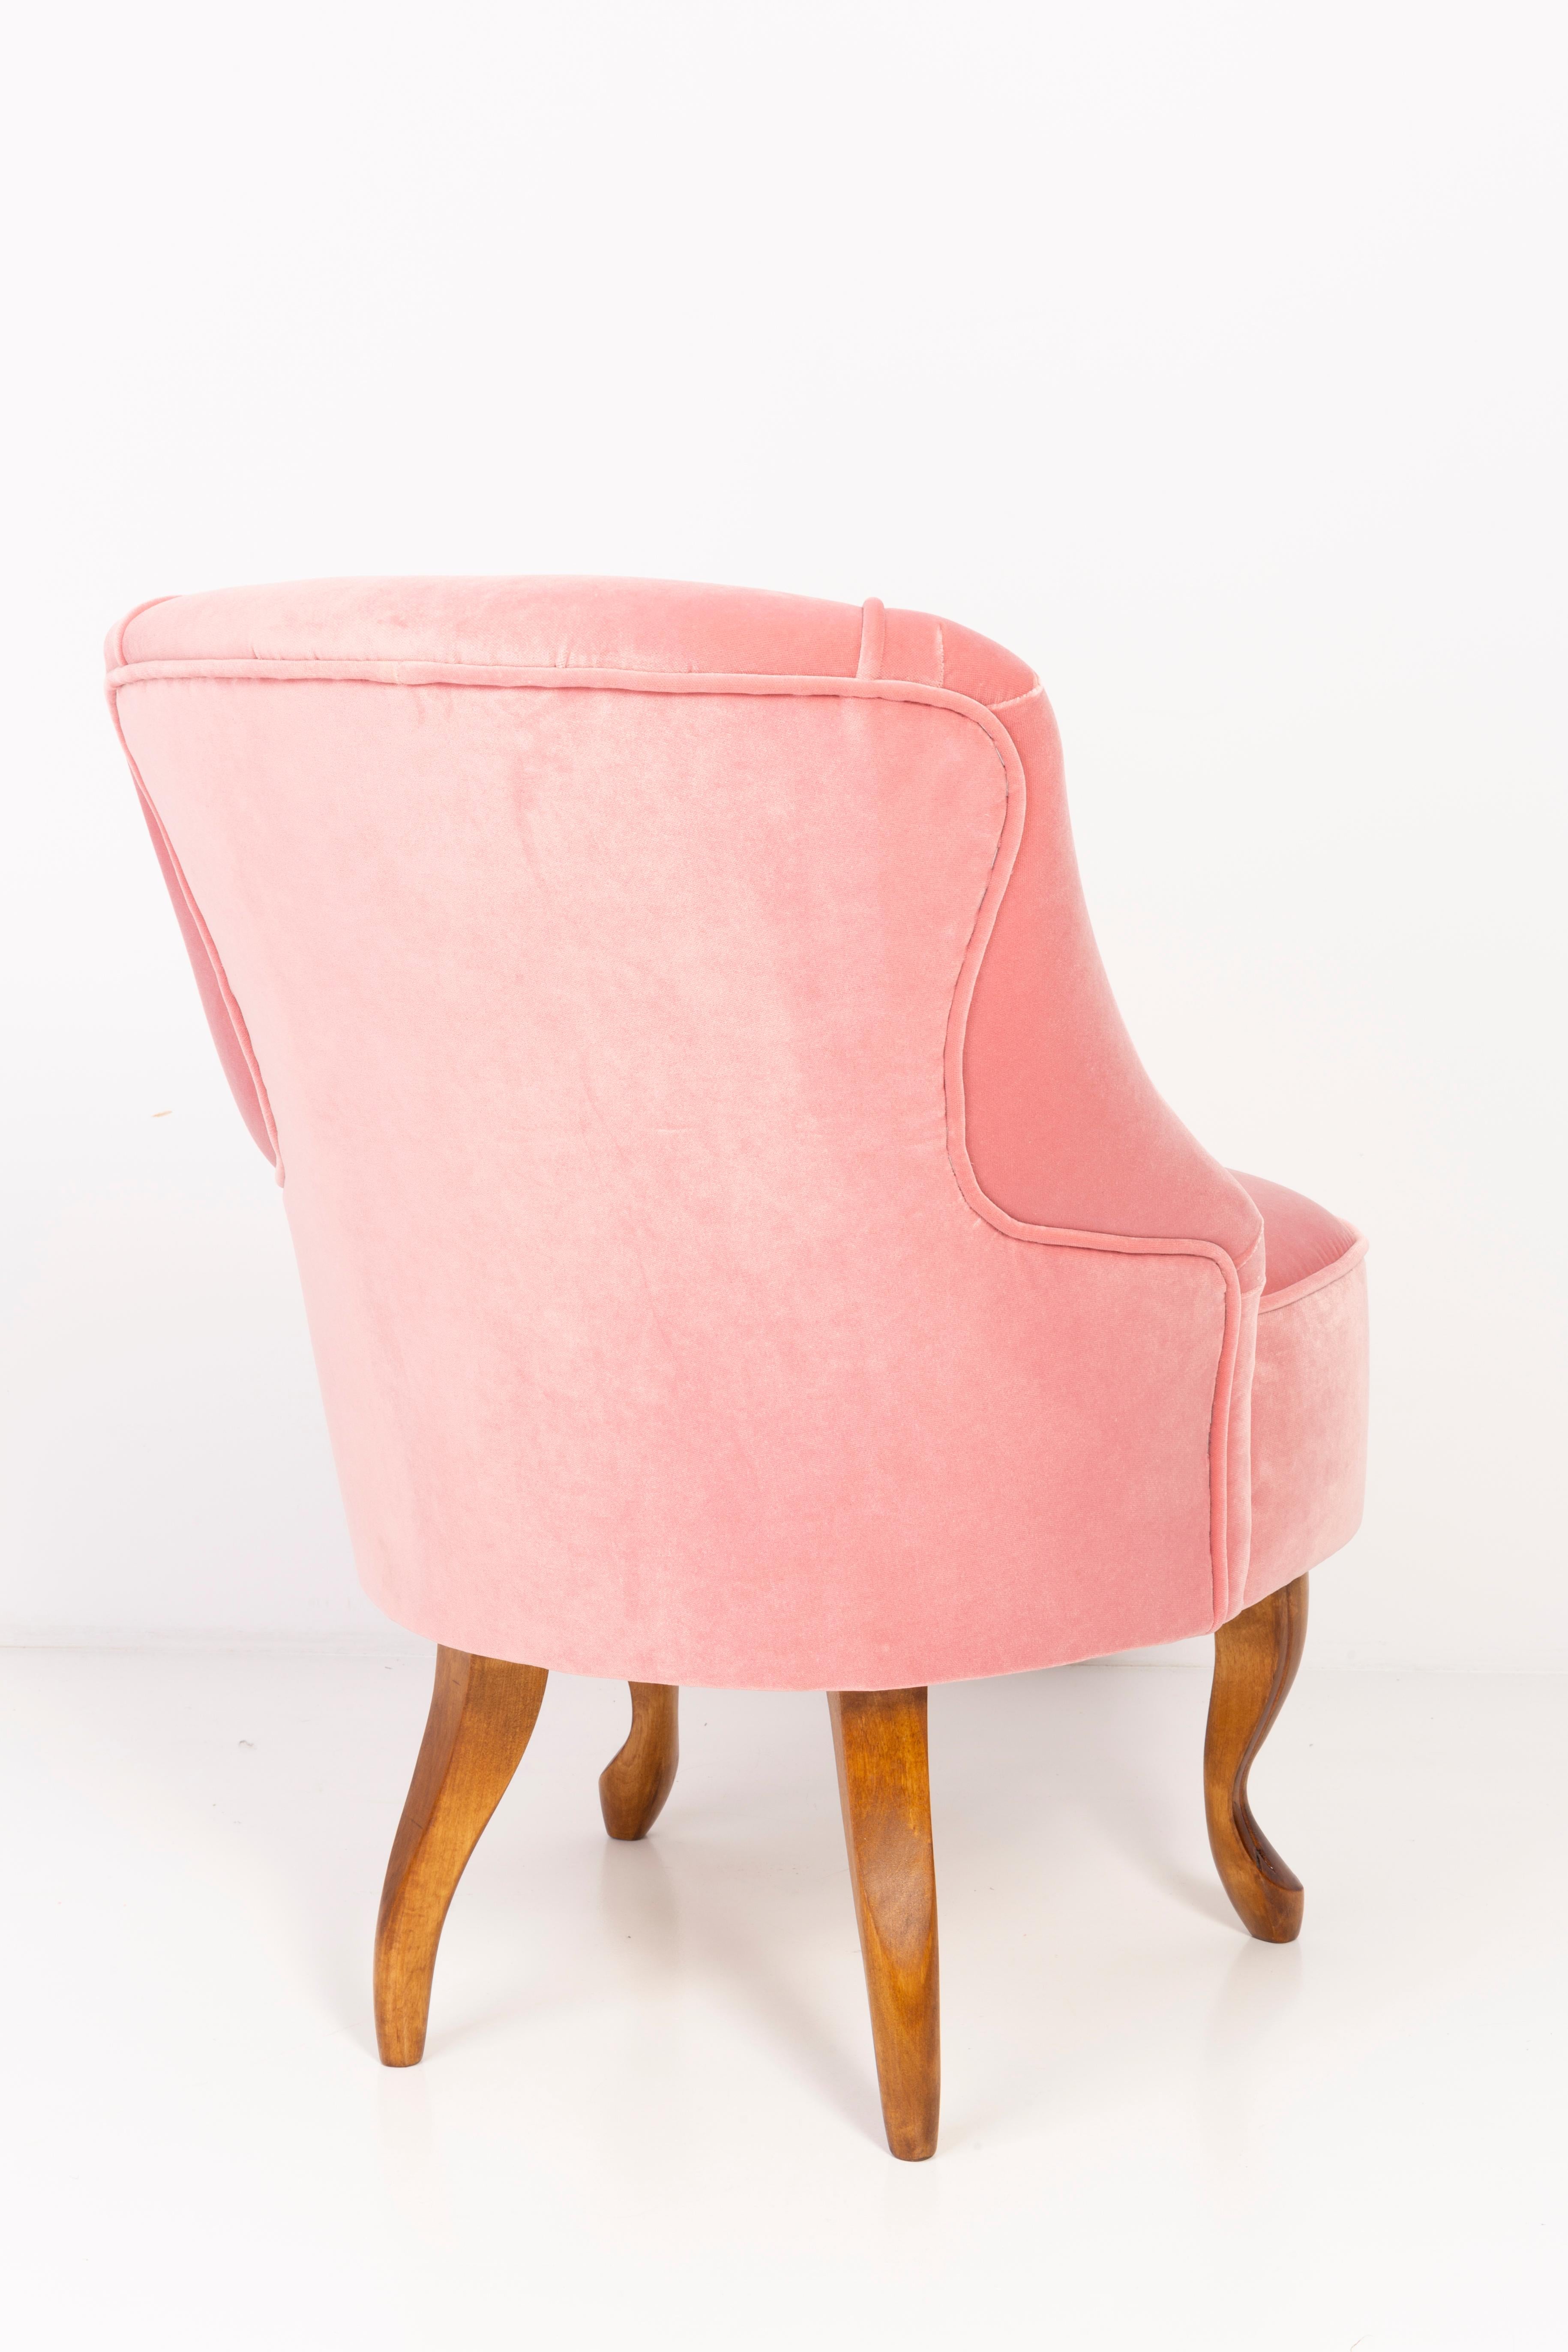 Hand-Crafted 20th Century Art Deco Baby Pink Armchair, 1950s For Sale